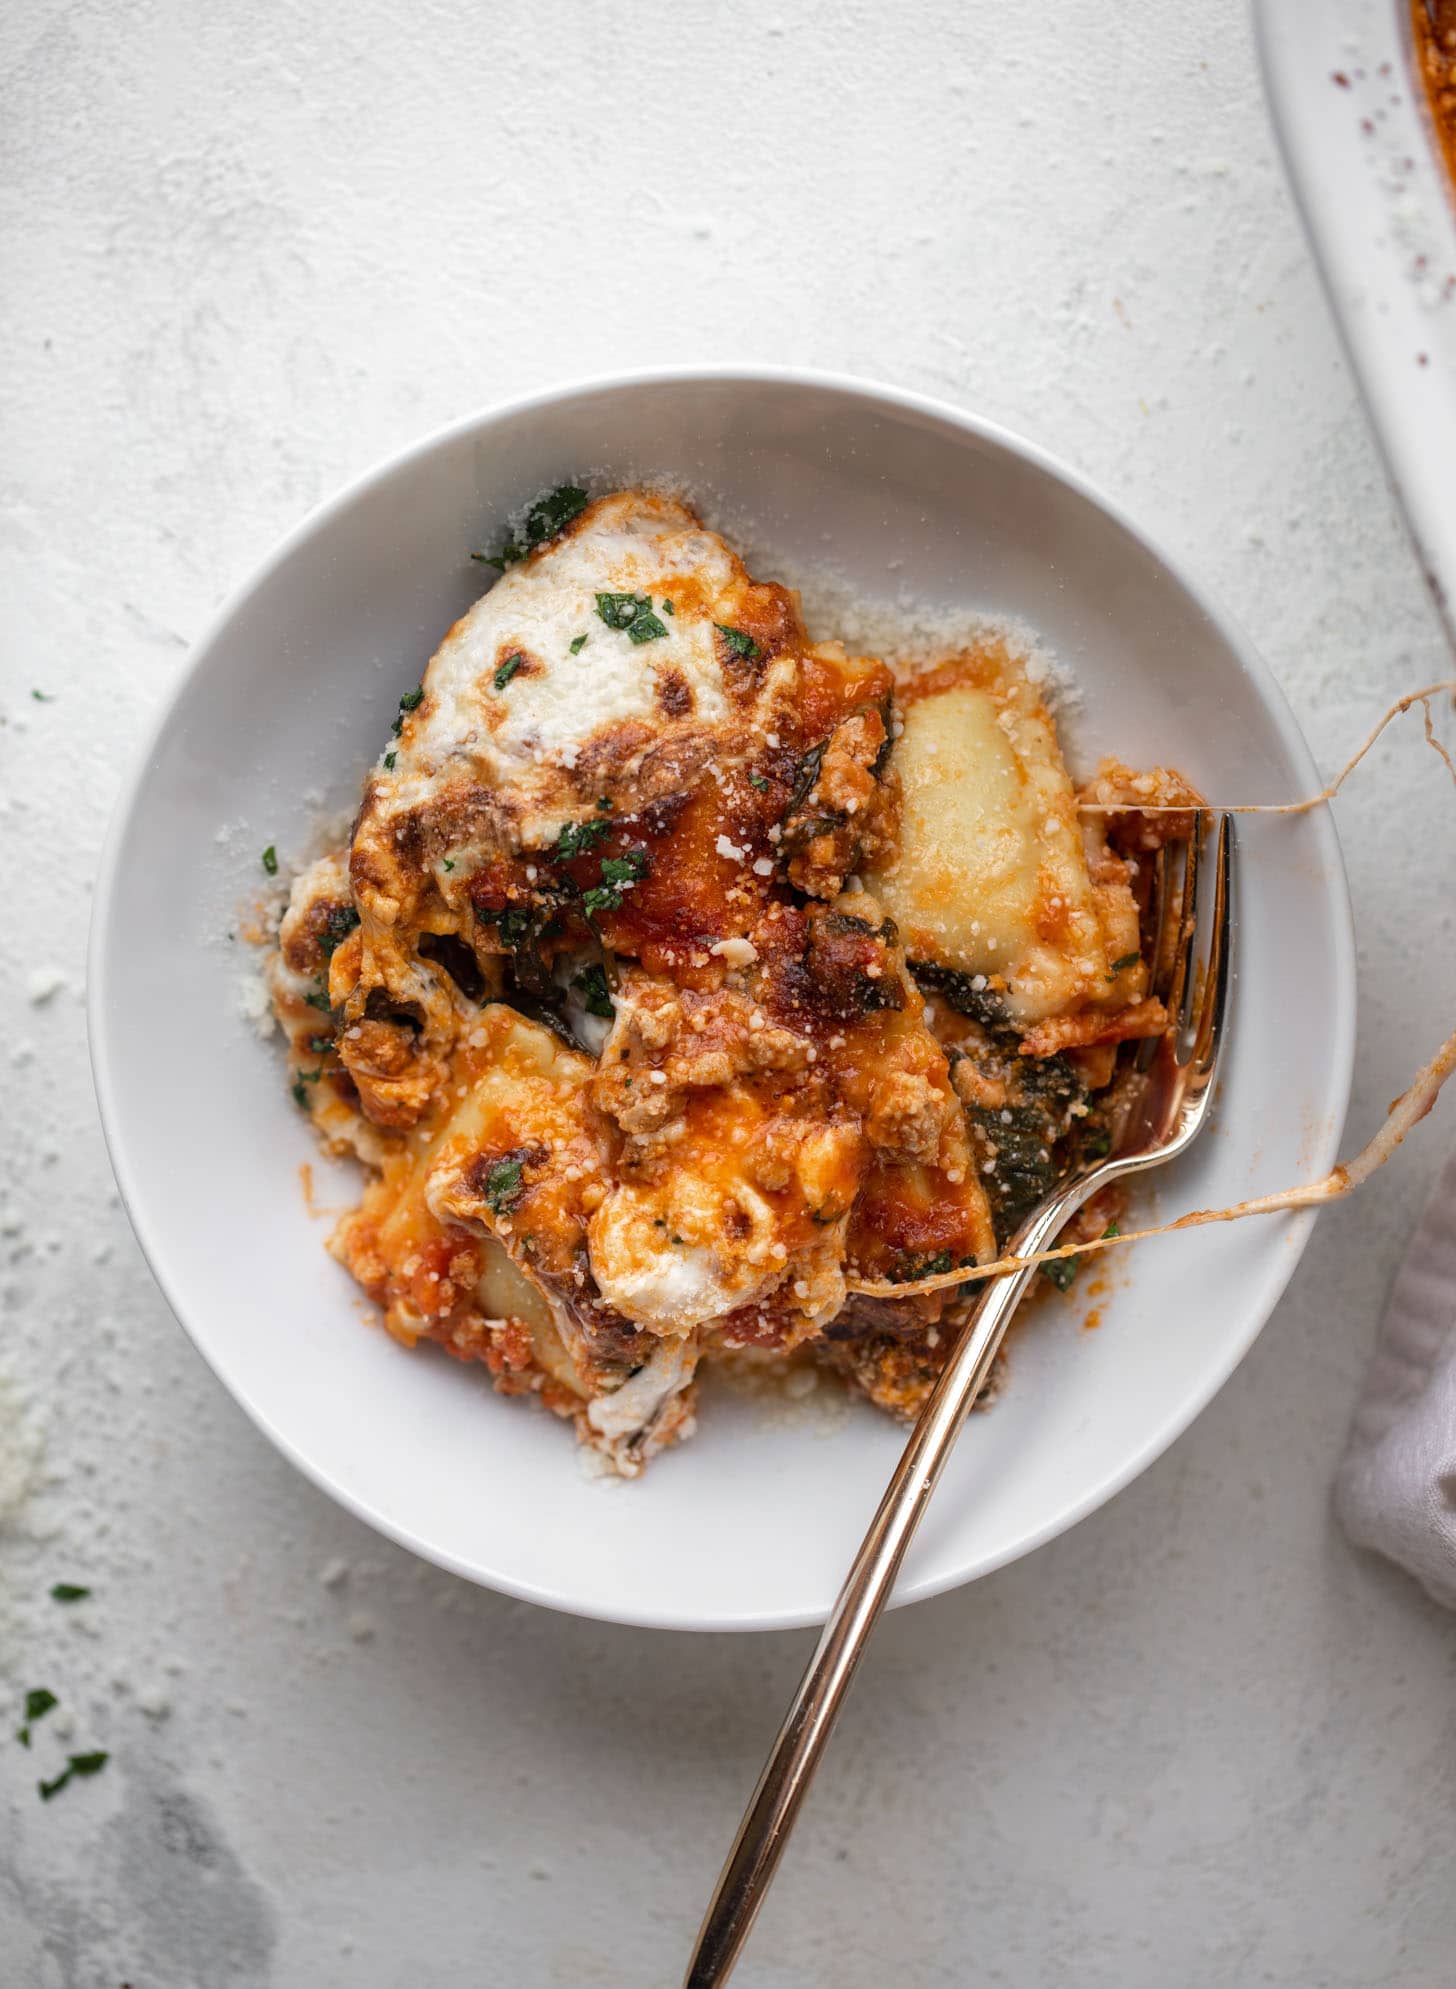 baked ravioli with spinach